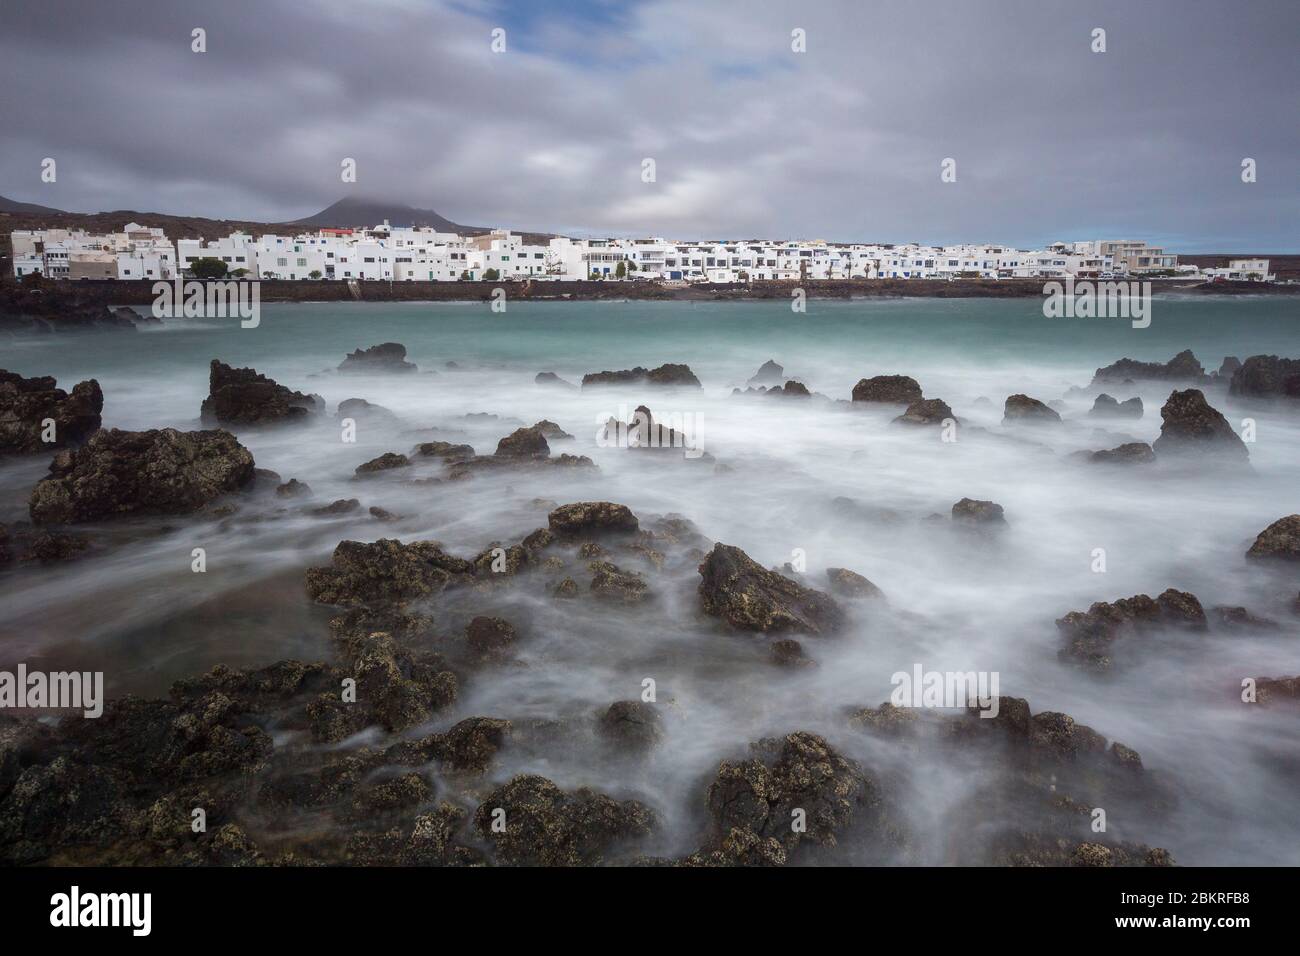 Spain, Islands of the Canary Islands, Island of Lanzarote, the village and the coast of Punta Mujeres Stock Photo